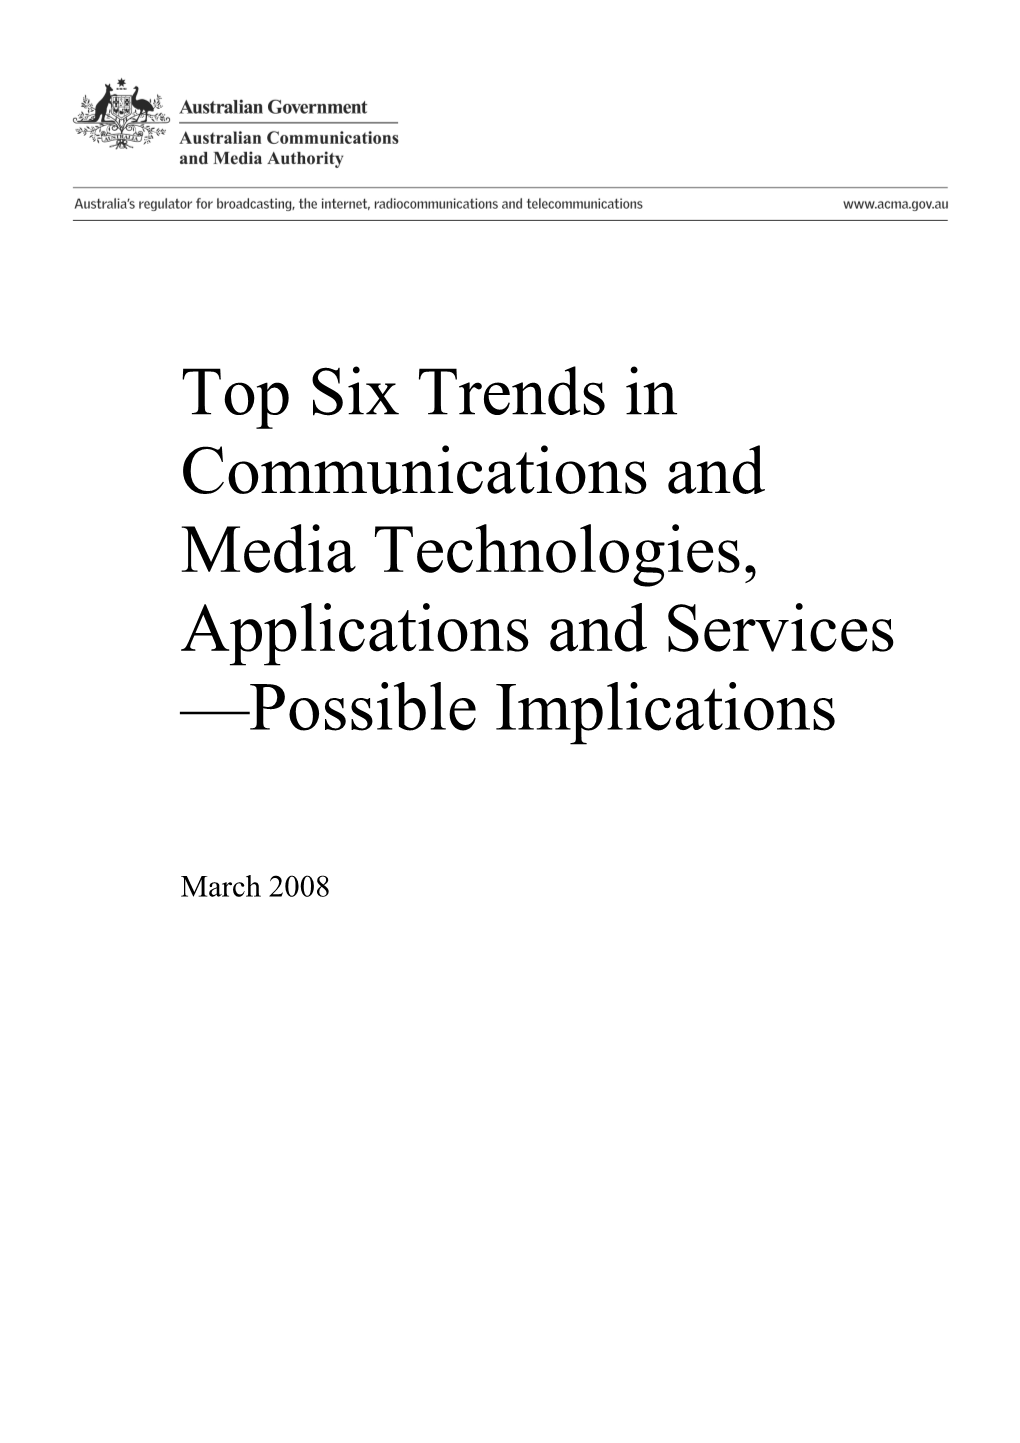 Top Six Trends in Communications and Media Technologies, Applications and Services Possible